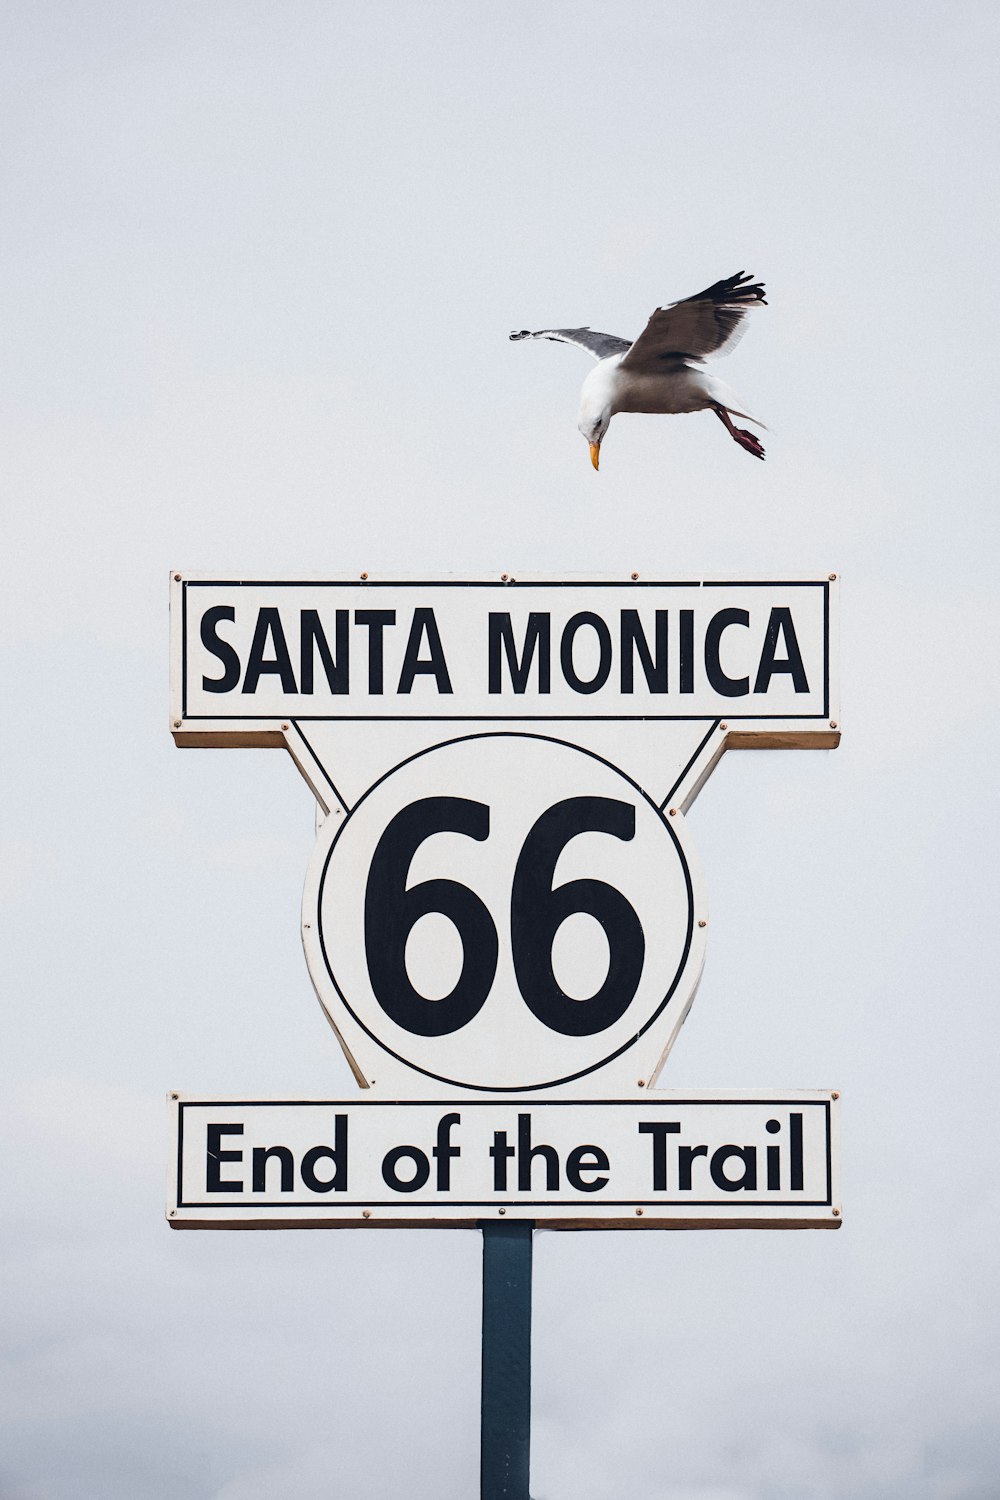 a seagull flying over a sign that says santa monica and the end of